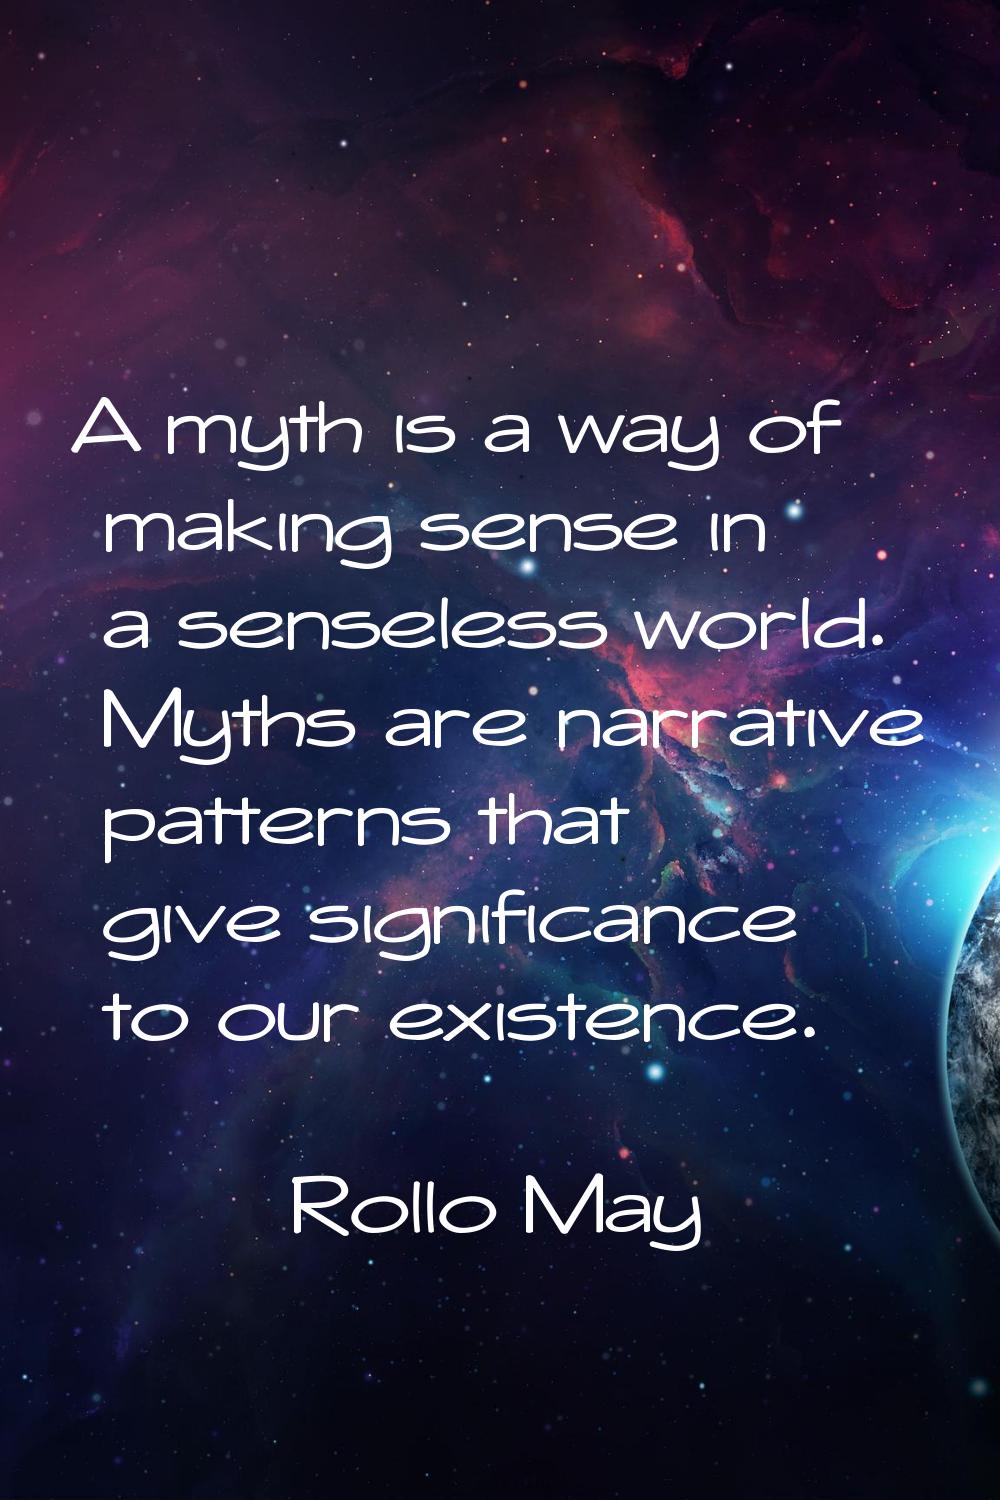 A myth is a way of making sense in a senseless world. Myths are narrative patterns that give signif